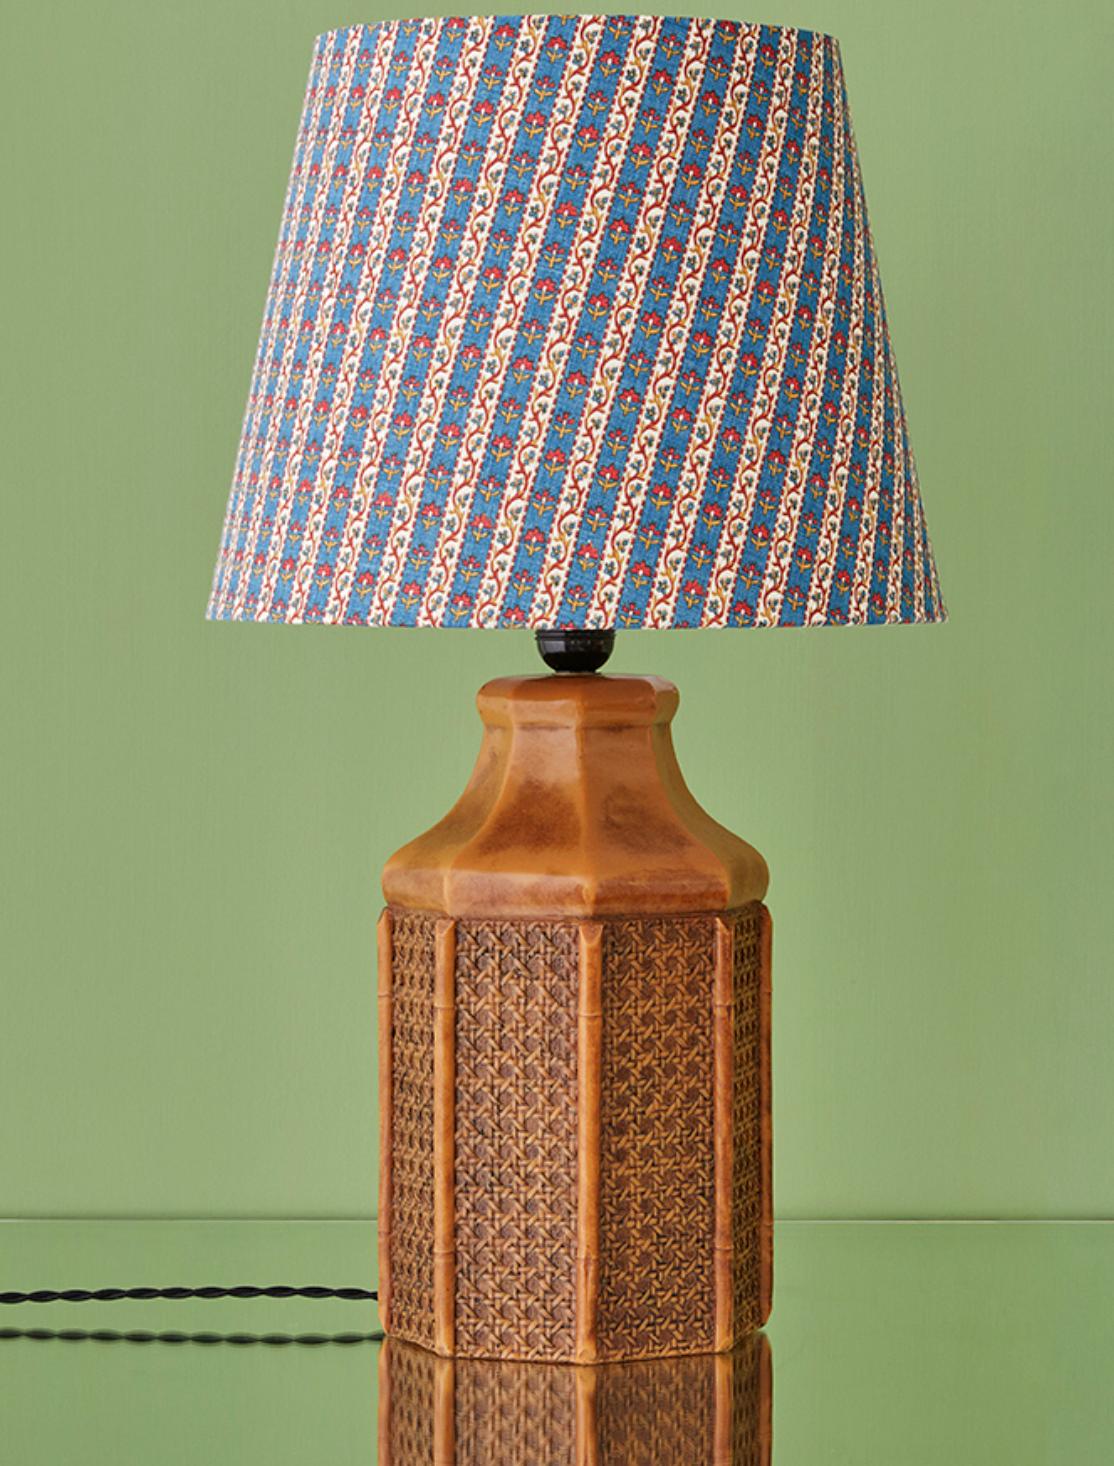 France, Vintage

Table lamp with customized lampshade by us.

H 63 x Ø 36 cm